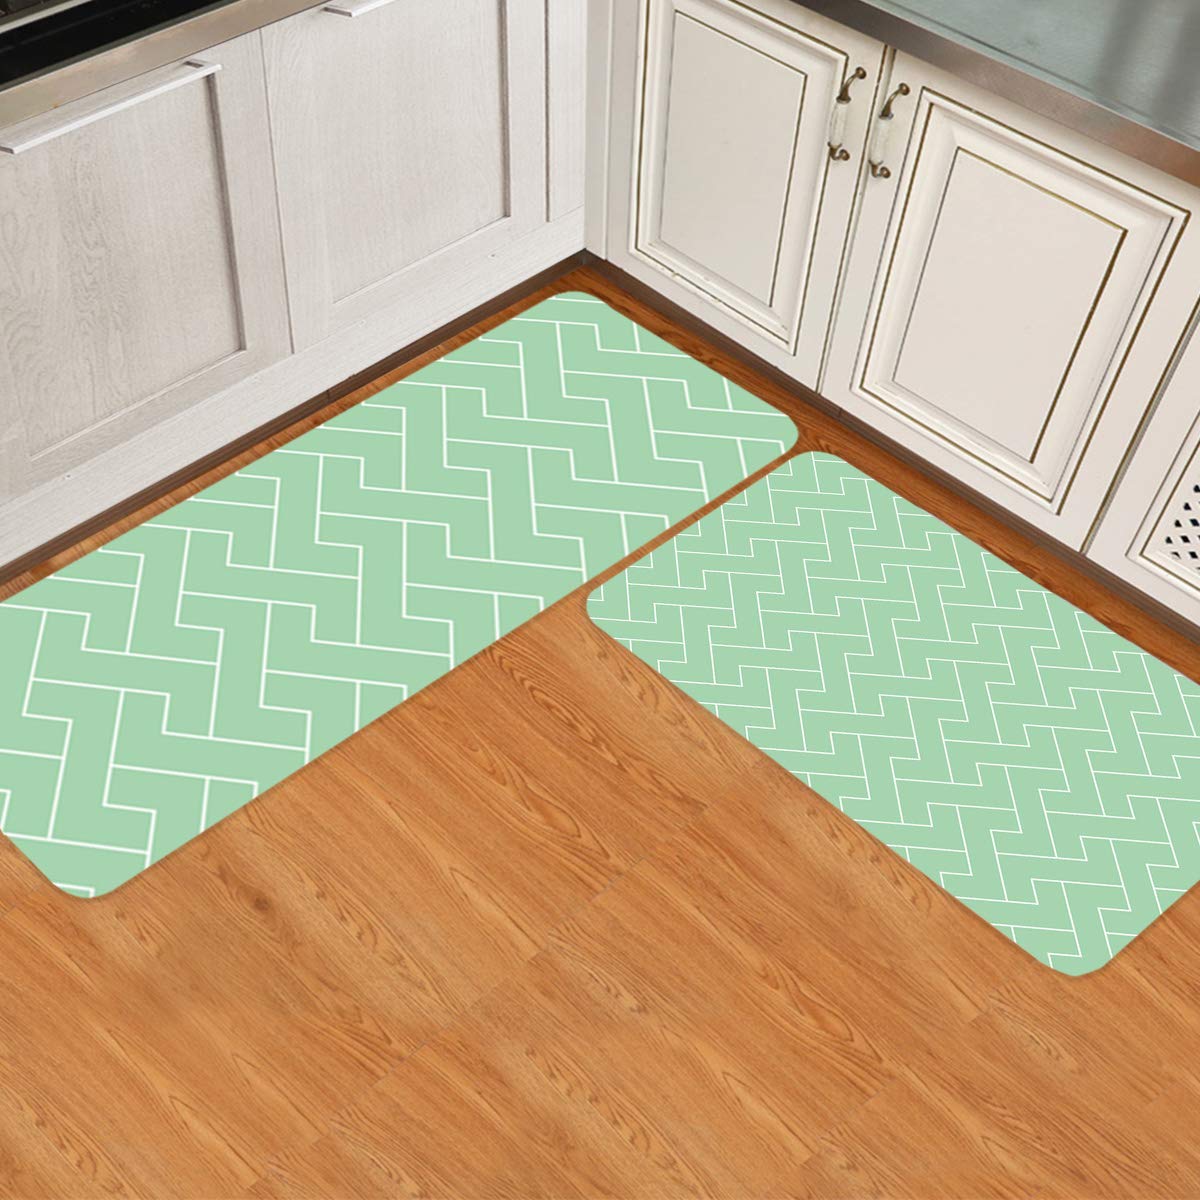 HELLOWINK Kitchen Mat Set of 2 Anti-Fatigue Kitchen Rug, Mint Green Non-Slip Kitchen Mats and Rugs, Kitchen Doormat Runner Rug for Floor Home Office Sink Laundry, Geometric